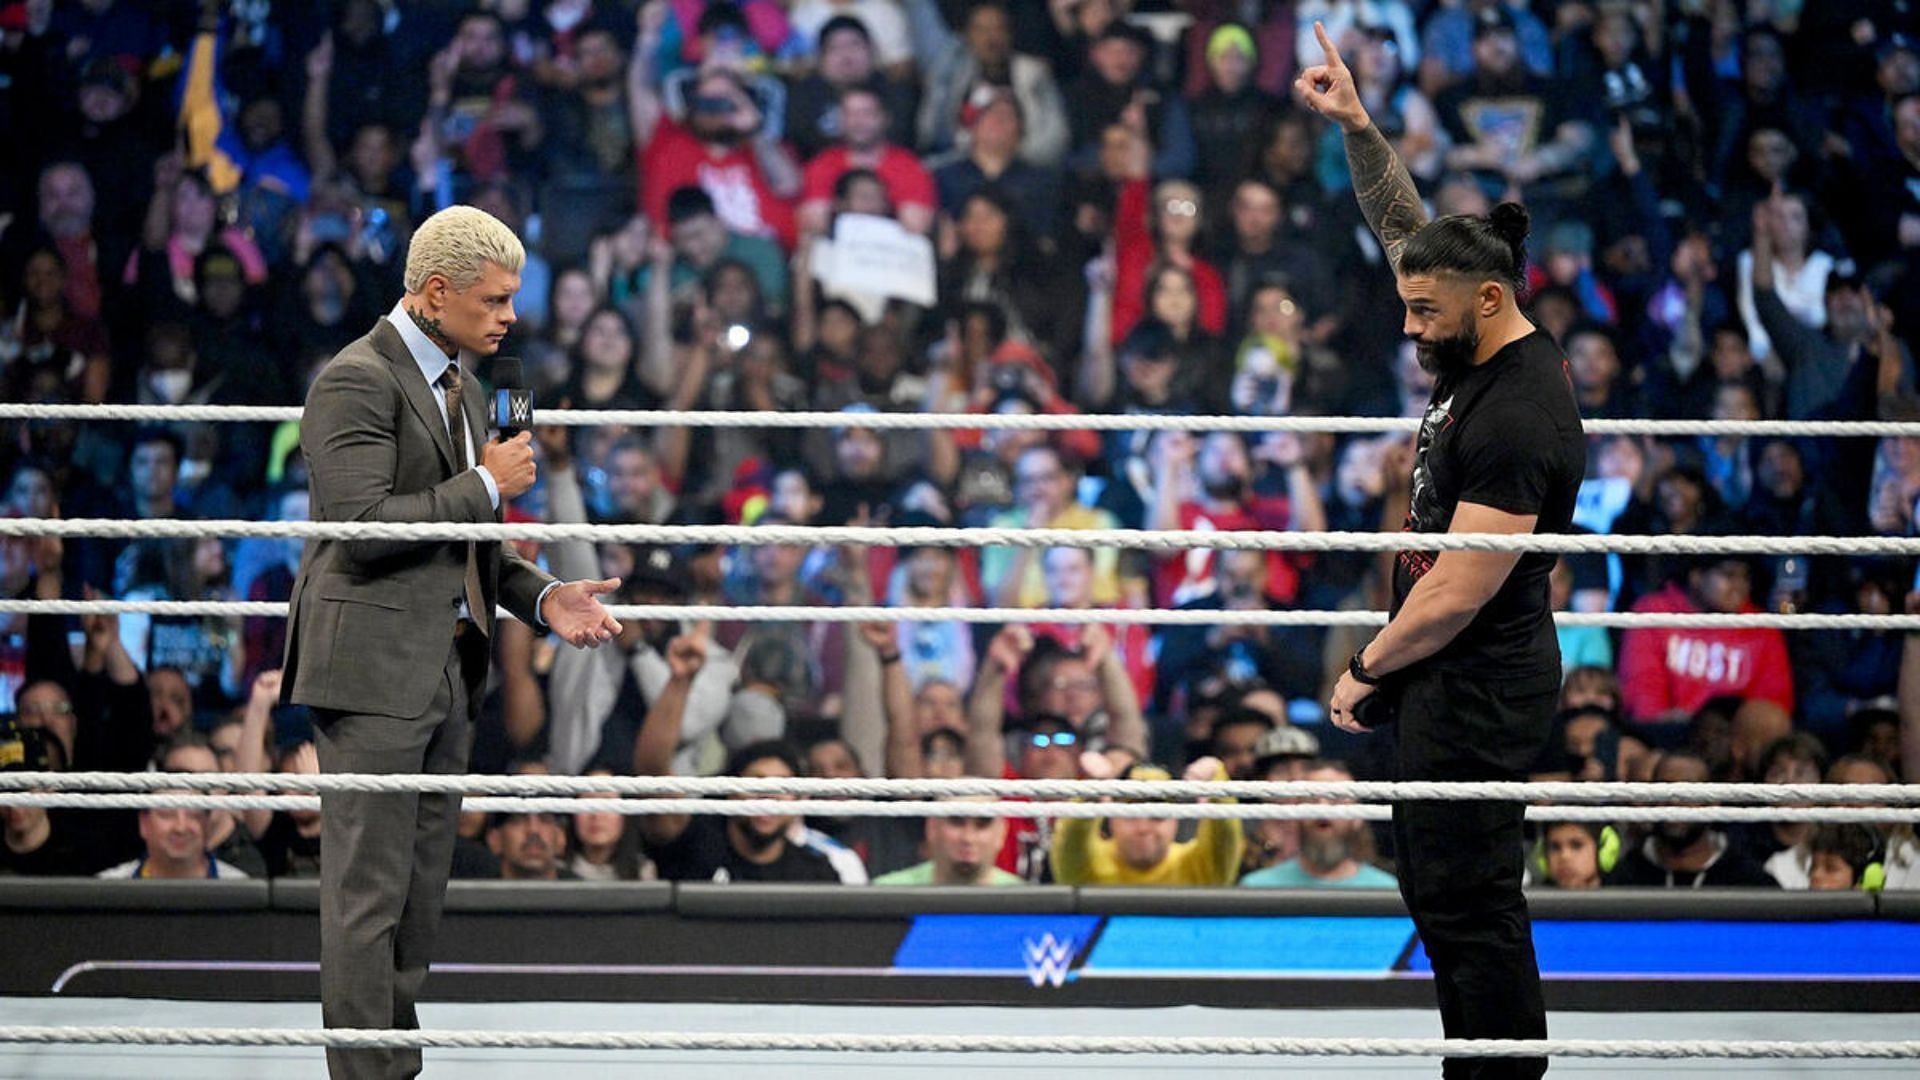 Cody Rhodes and Roman Reigns will come face-to-face on SmackDown